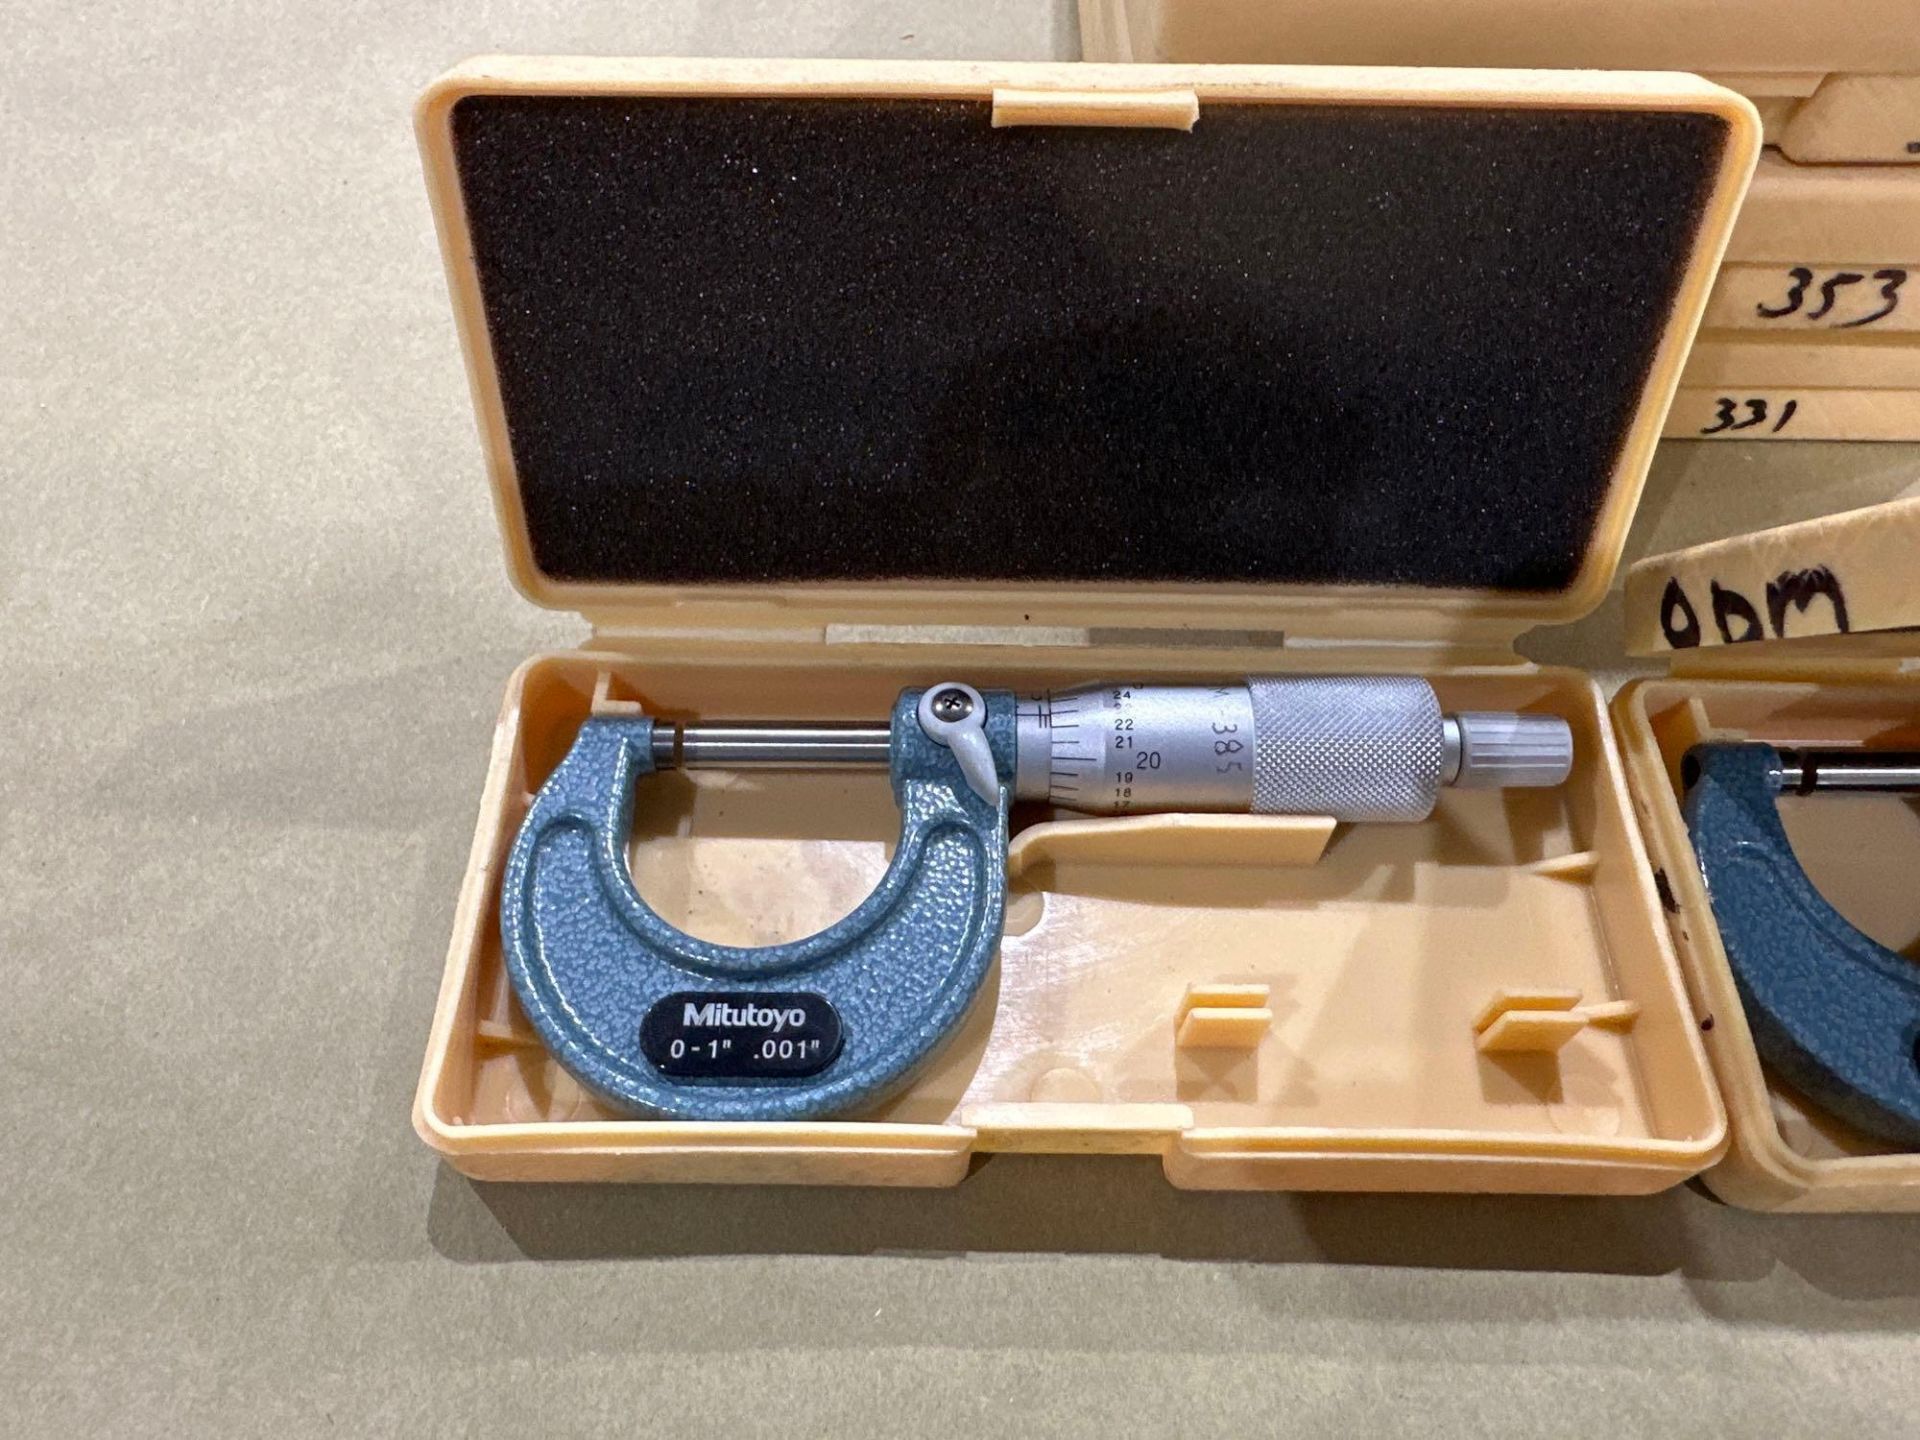 Lot of 12: Mitutoyo Mechanical OD Micrometer M110-1”, 0-1” Range, .001” Graduation, in plastic boxes - Image 6 of 7